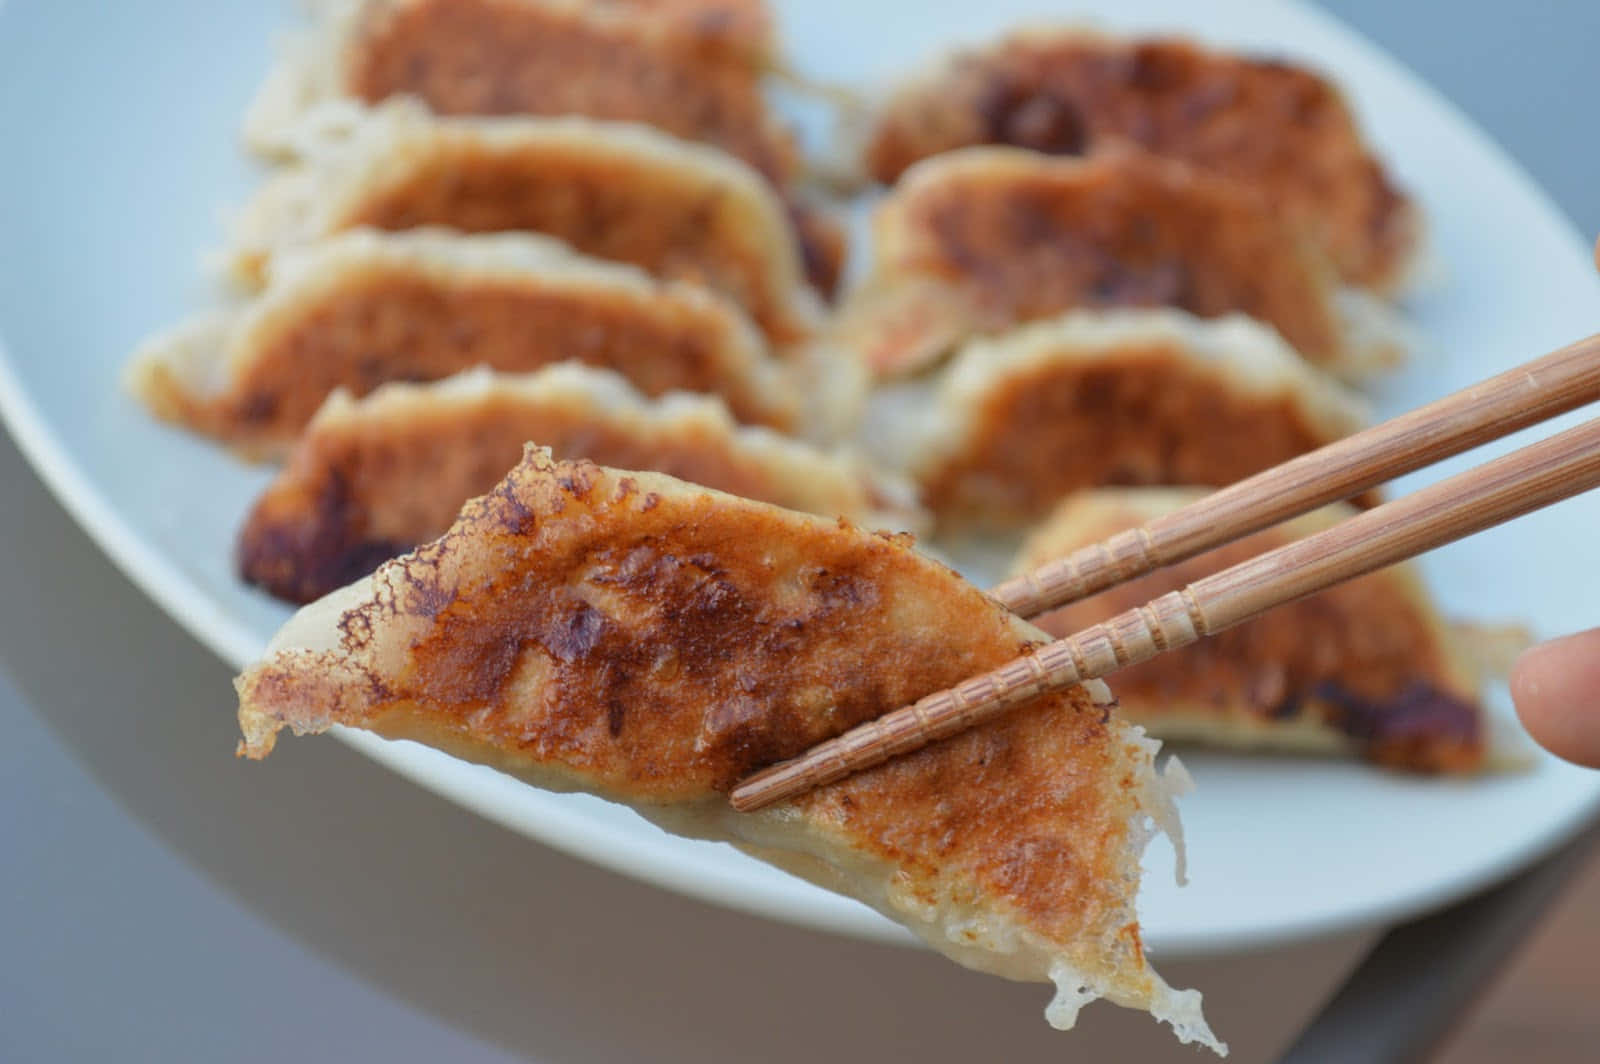 A Person Is Holding Chopsticks Over A Plate Of Dumplings